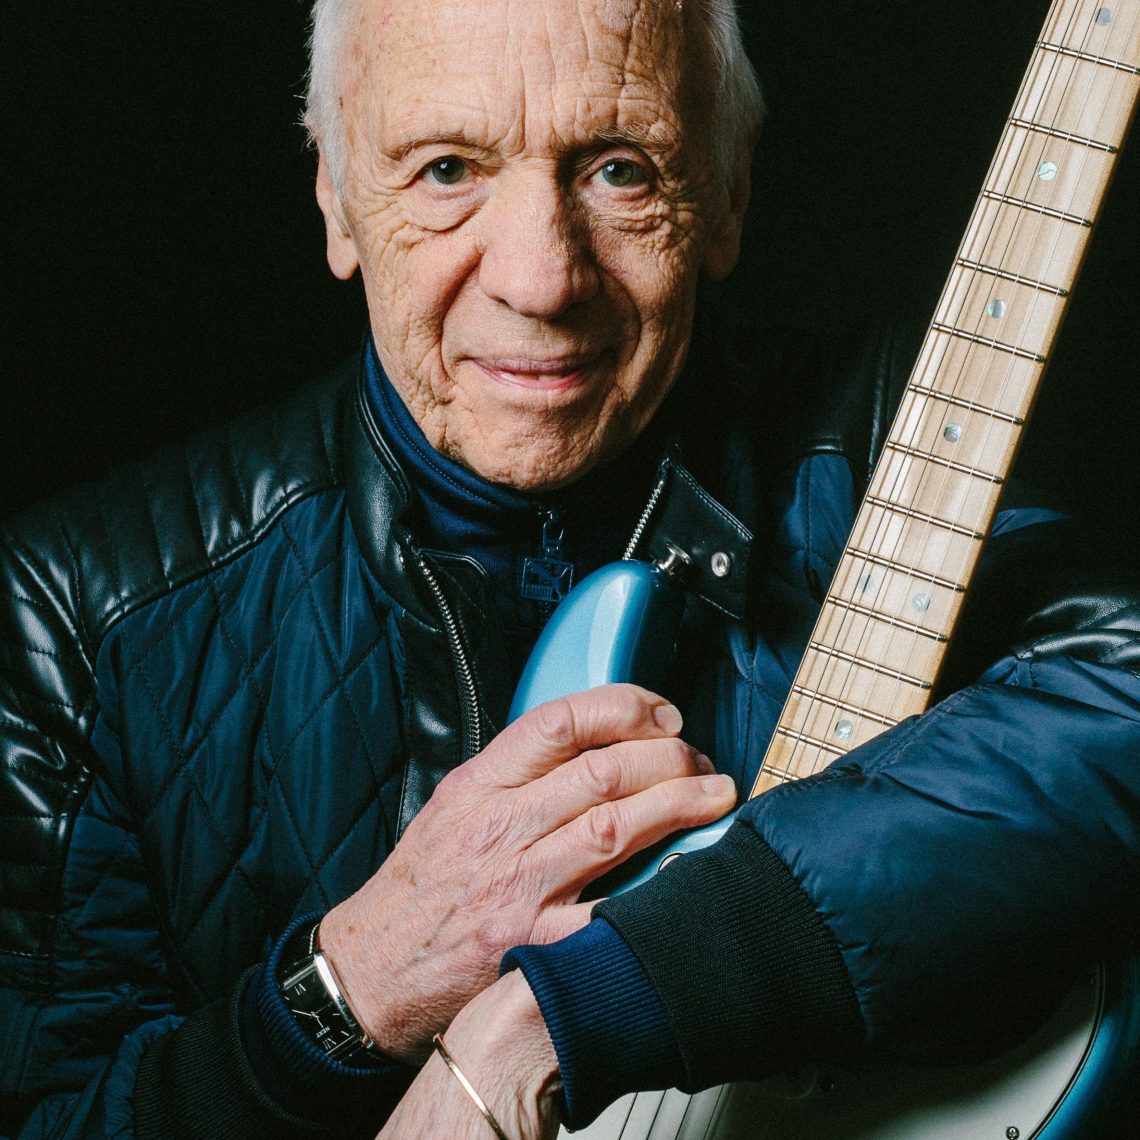 Robin Trower Releases in-studio video for “Ball Of Fire,” Inspired By Classic Gary Cooper Film